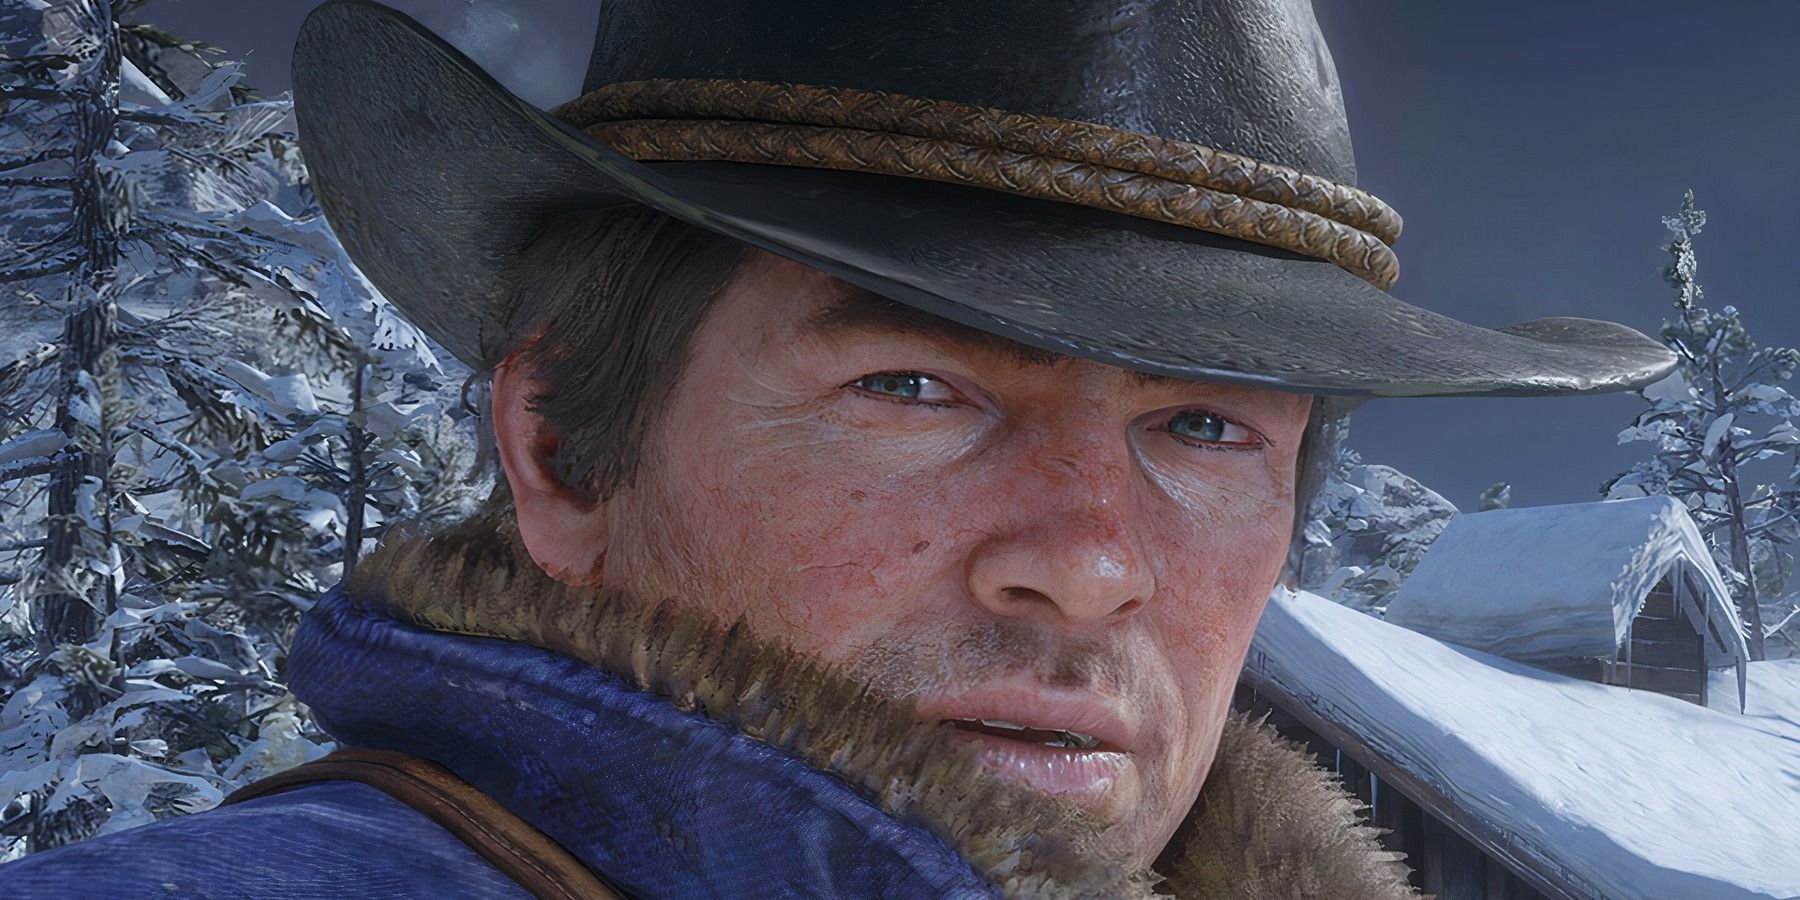 This Red Dead Redemption 2 Frozen Couple Glitch is Absolutely Terrifying